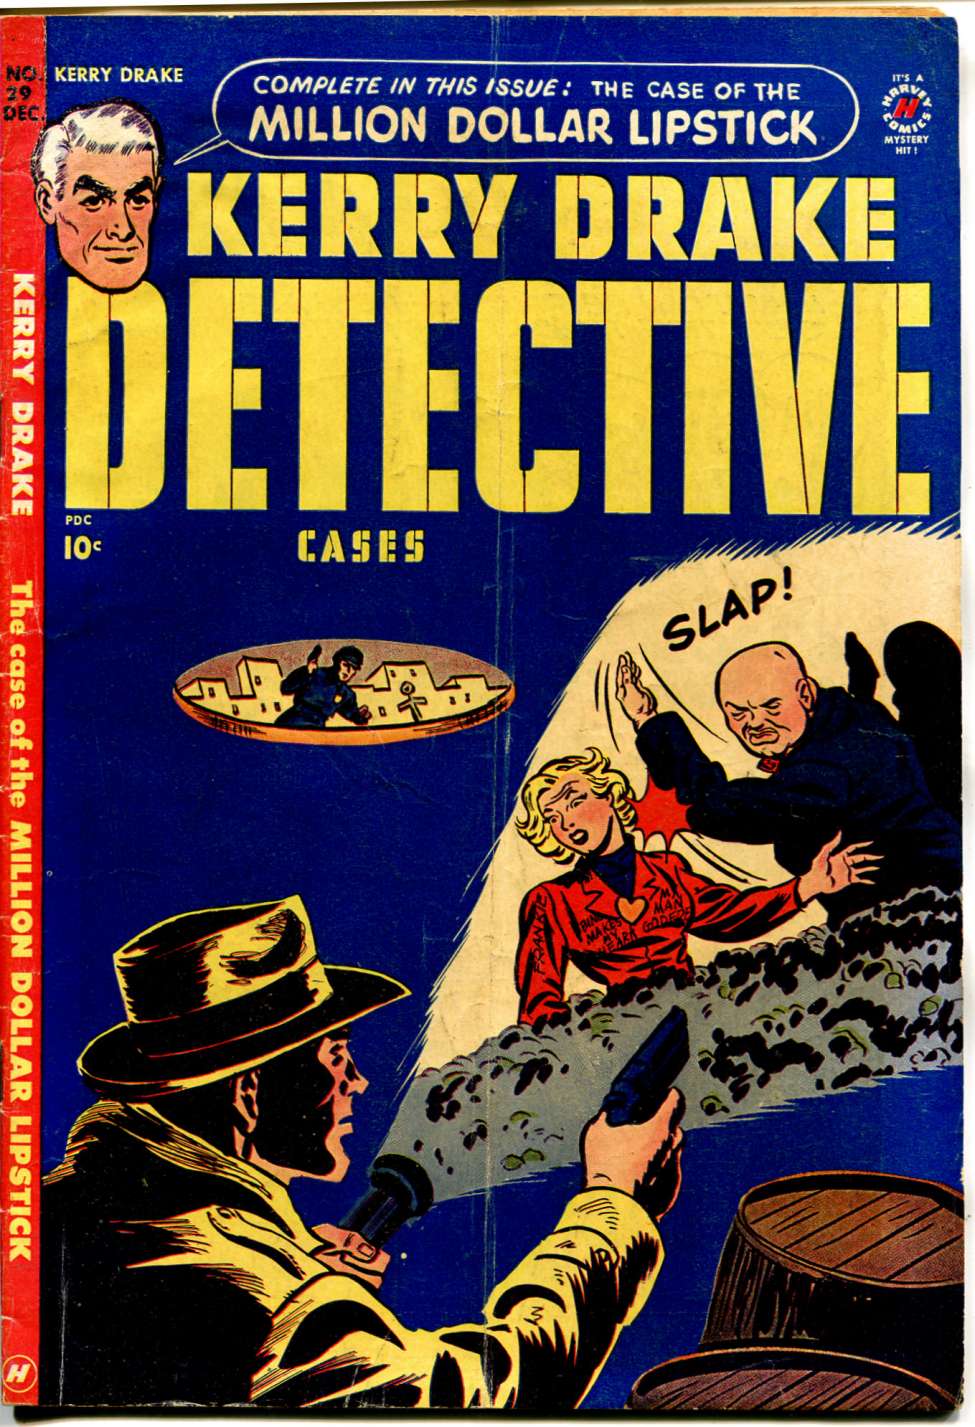 Comic Book Cover For Kerry Drake Detective Cases 29